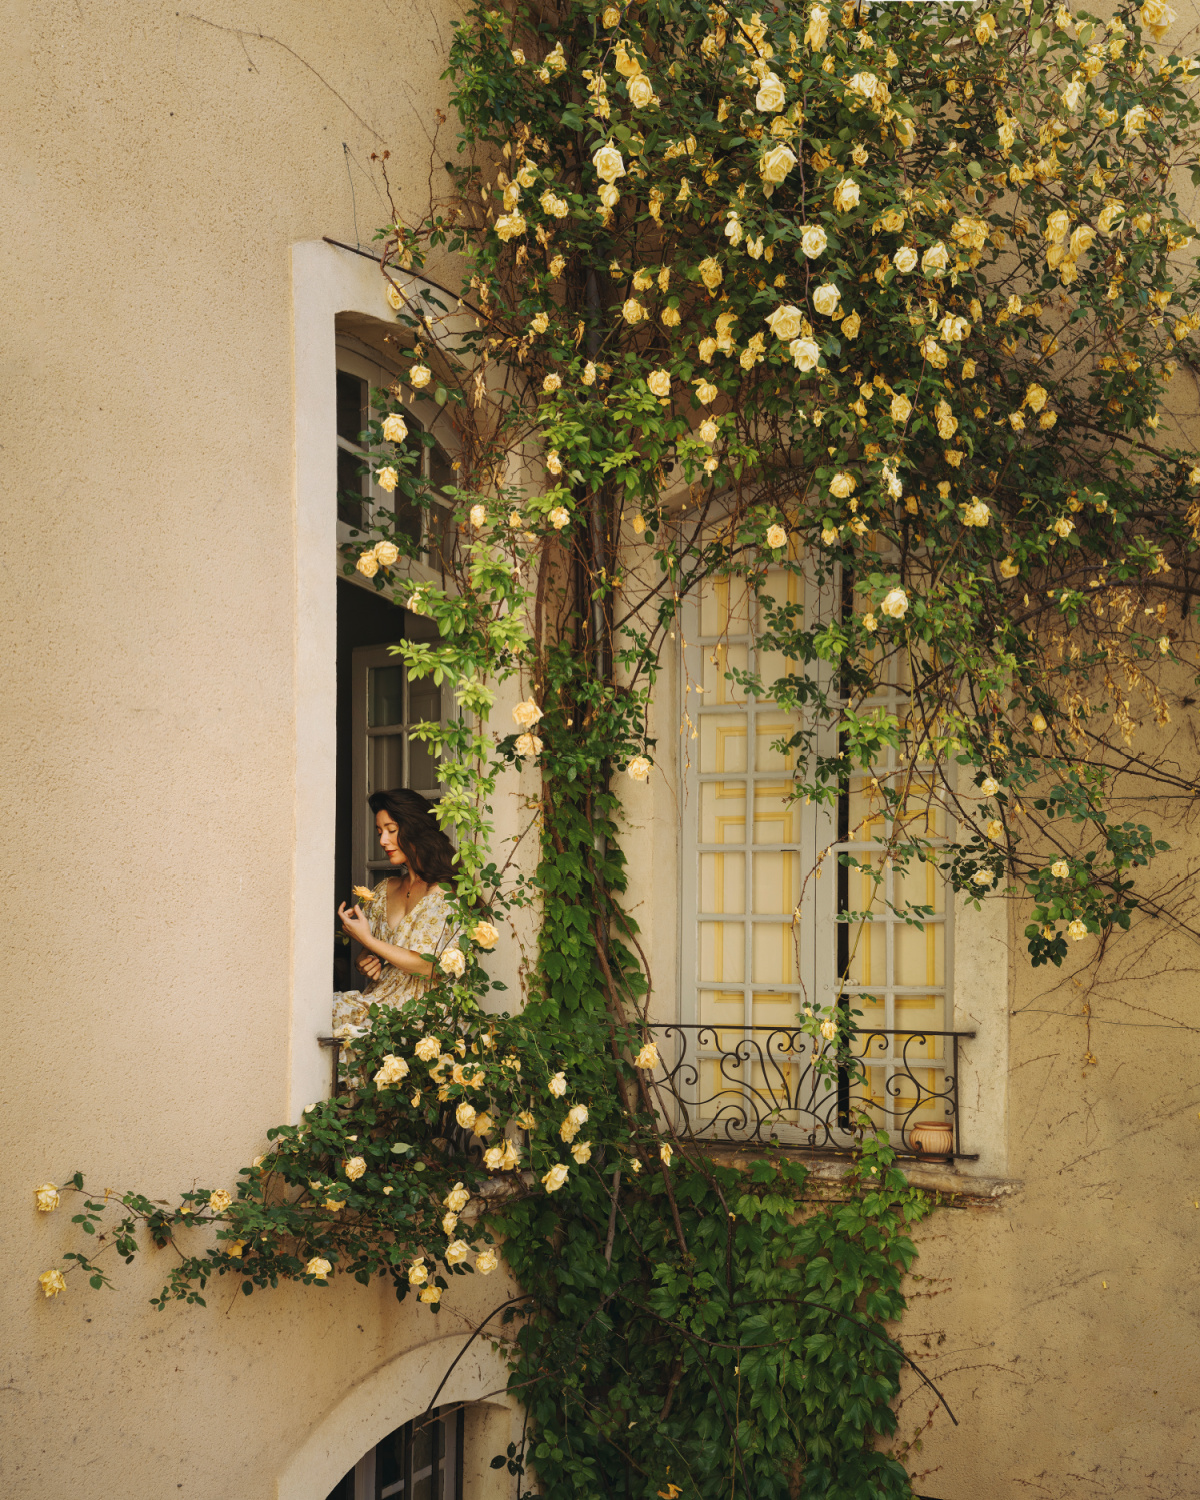 A romantic chateau moment from Provence in THE FLOWERS OF PROVENCE by Jamie Beck. #provencestyle #flowersofprovence #jamiebeck #frenchcountrybooks